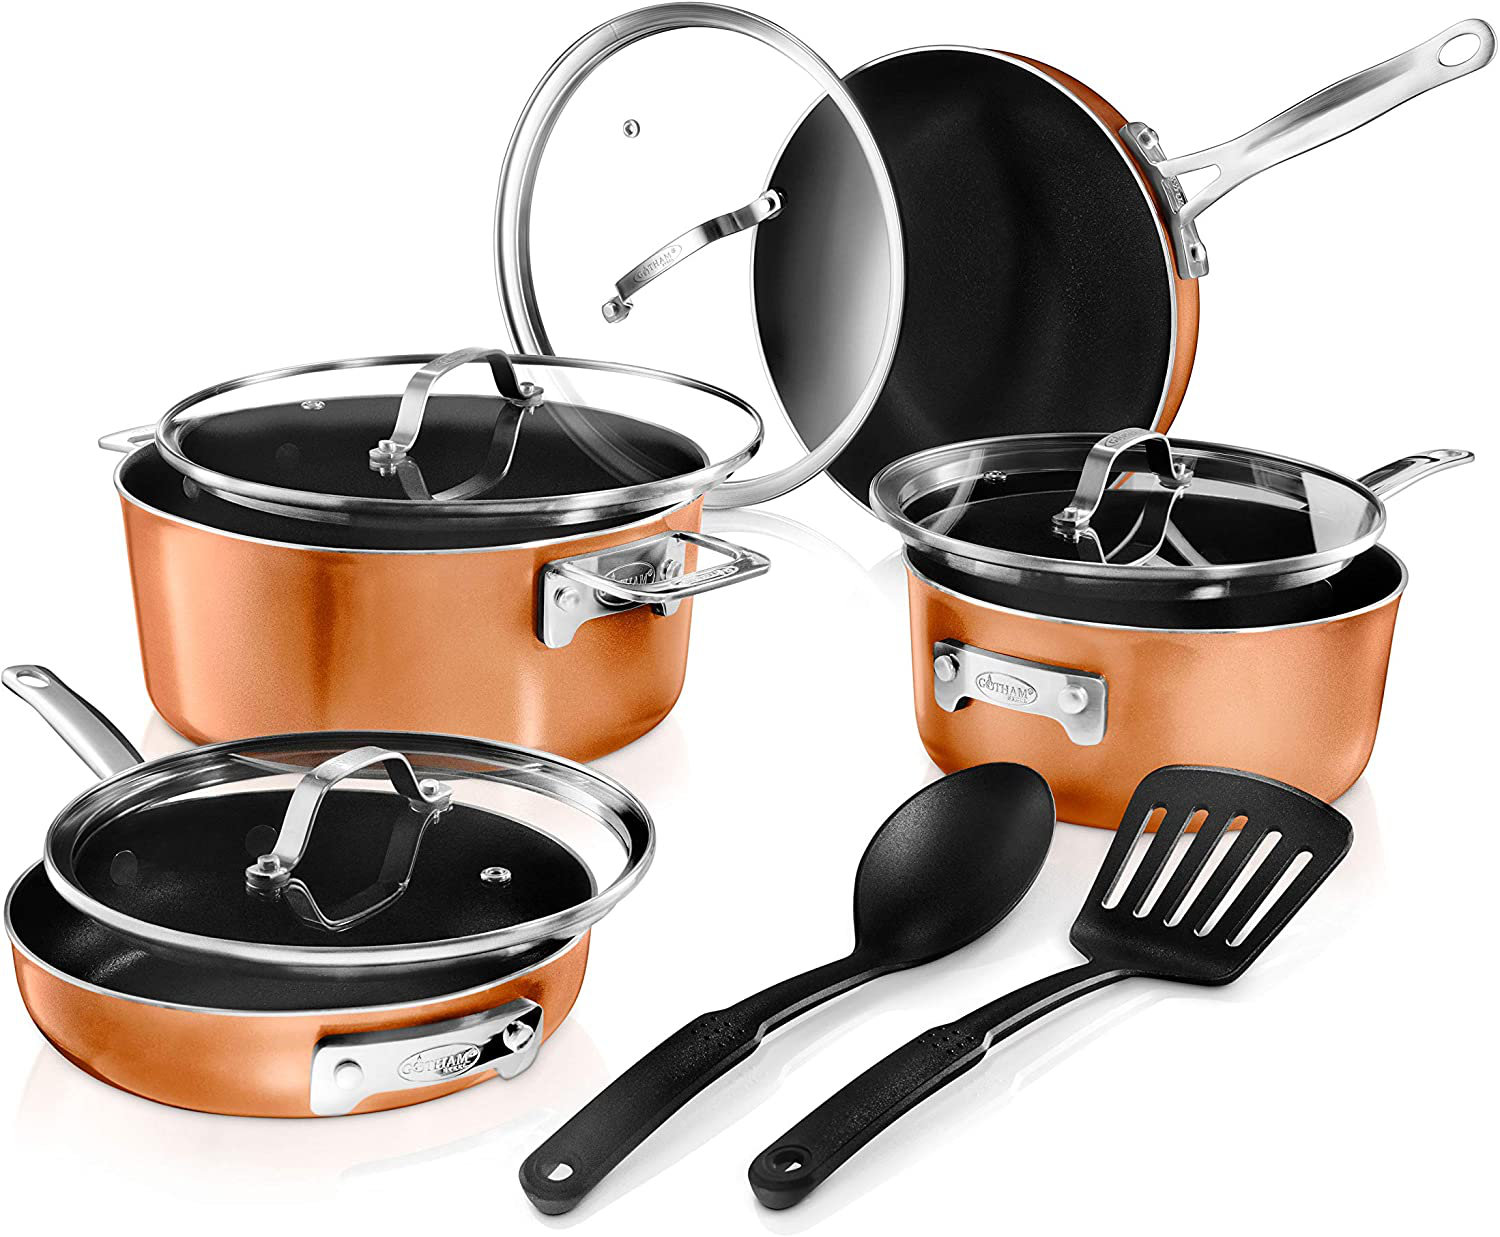 Gotham Steel 2741 Stackable Pots and Pans Stackmaster Complete 10 Piece Cookware Set Saves 30% More Space with Ultra Nonstick Cast Texture Ceramic Coating Dishwasher Safe Large Black 